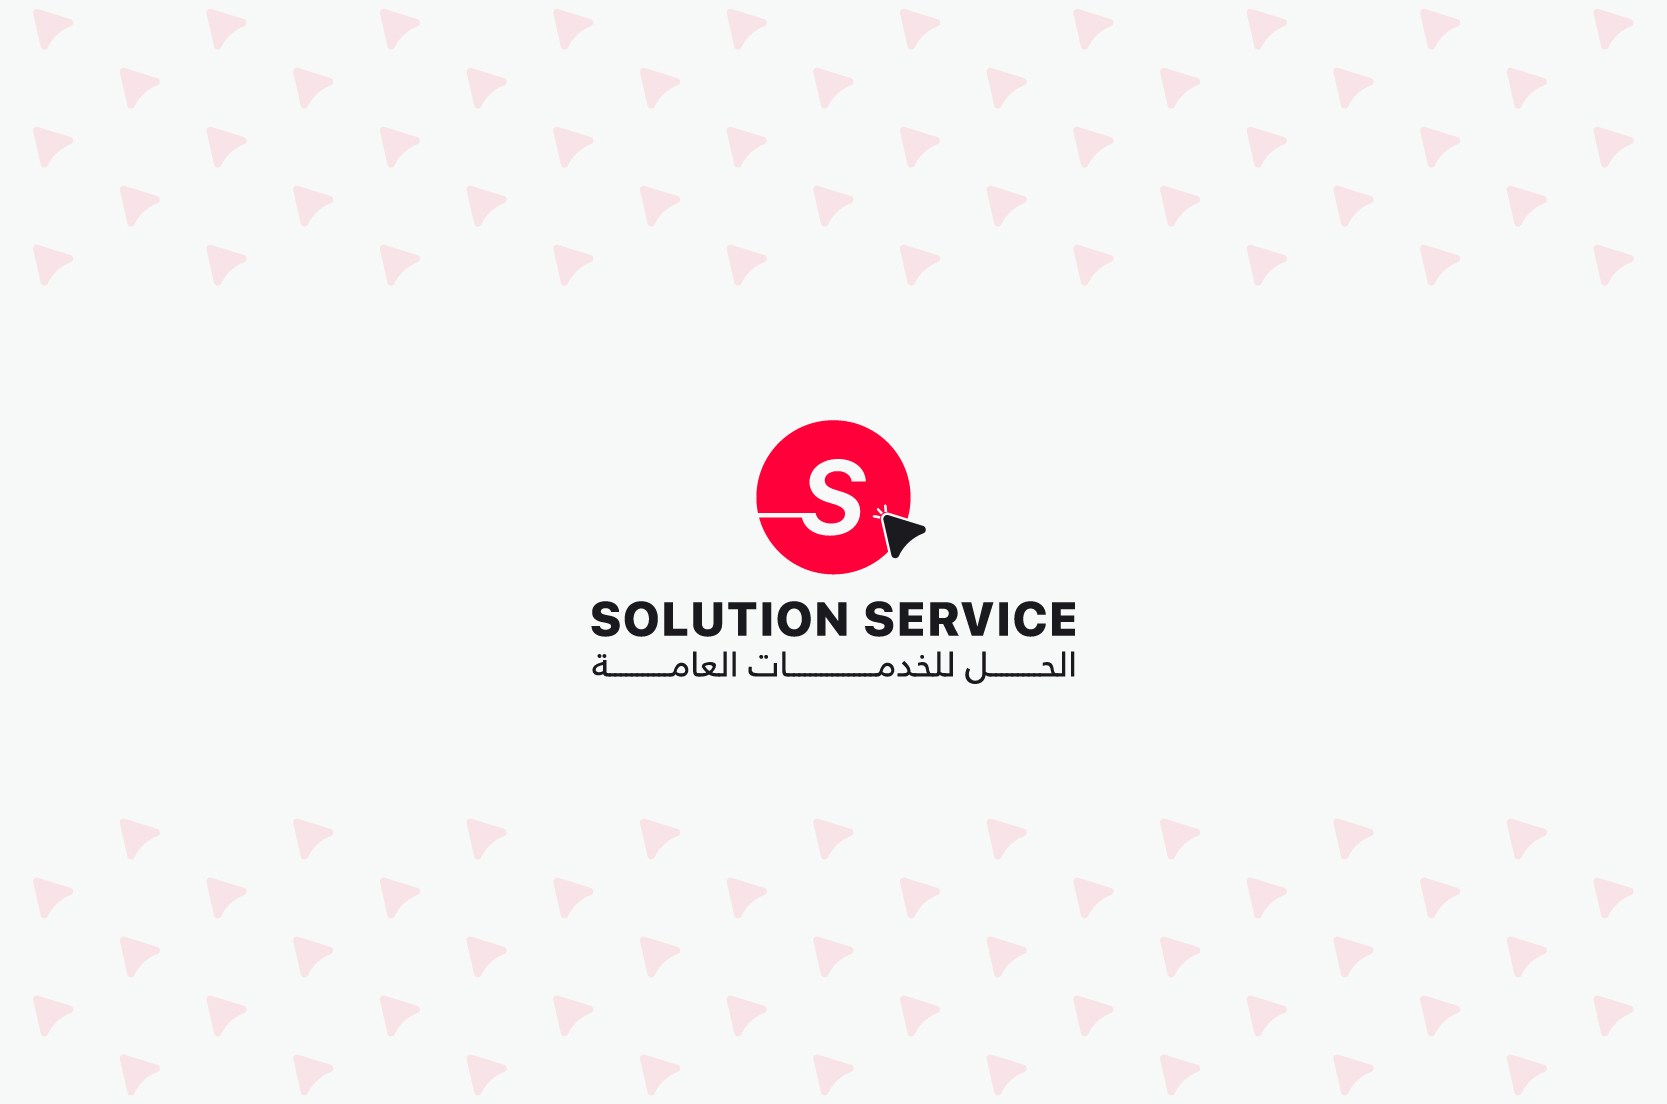 project-solution service.html